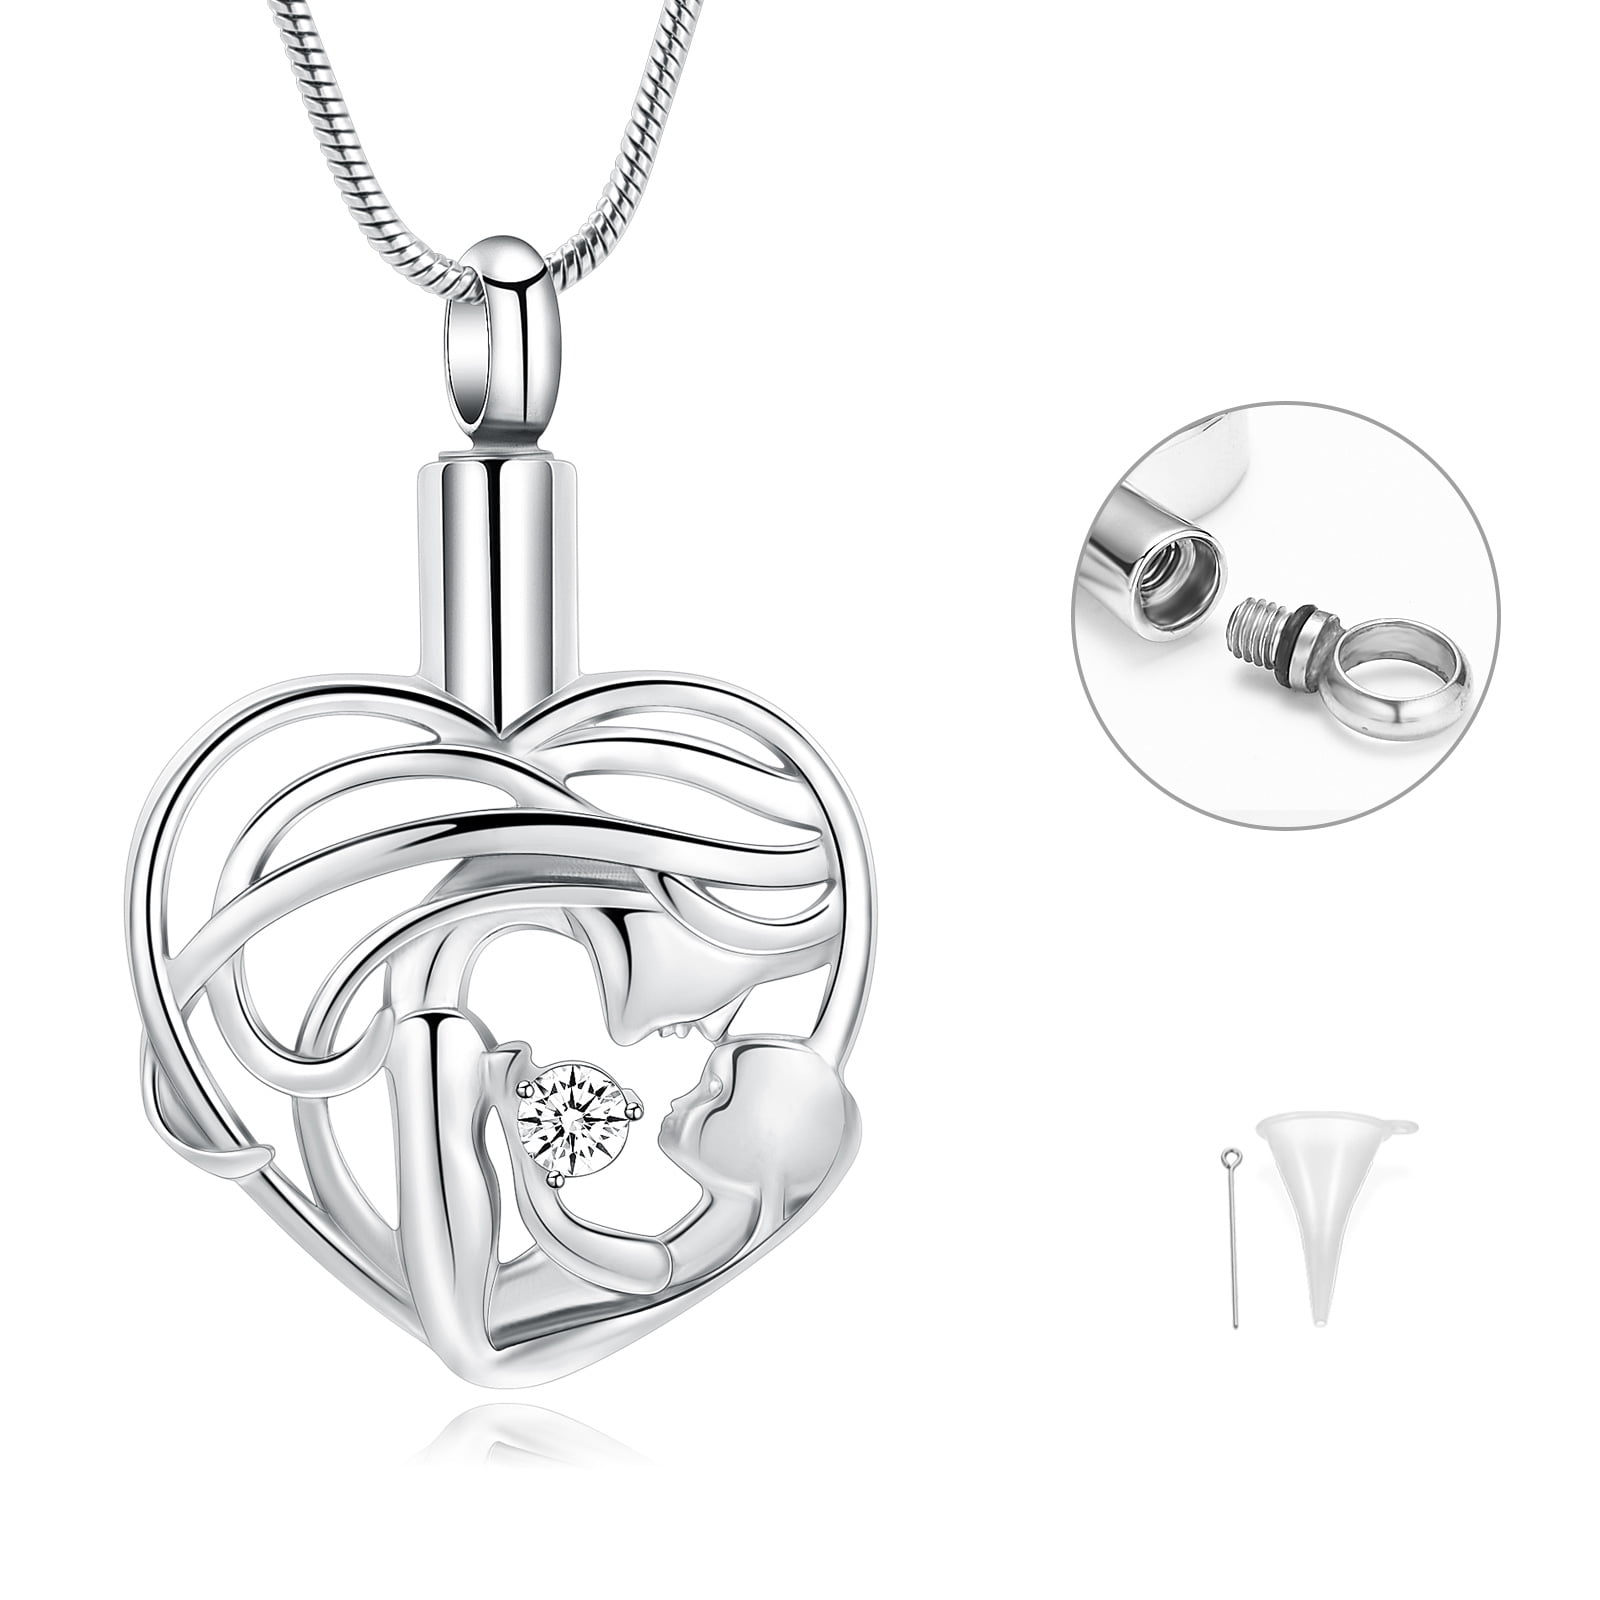 Kenklcie Cremation Jewelry For Ashes -No Longer By My Side Forever In My  Heart Urn Pendant Necklace For Ashes Grandma Grandpa Mom Dad Papa Nana  Sister …(Necklaces & Pendants) - Walmart.com